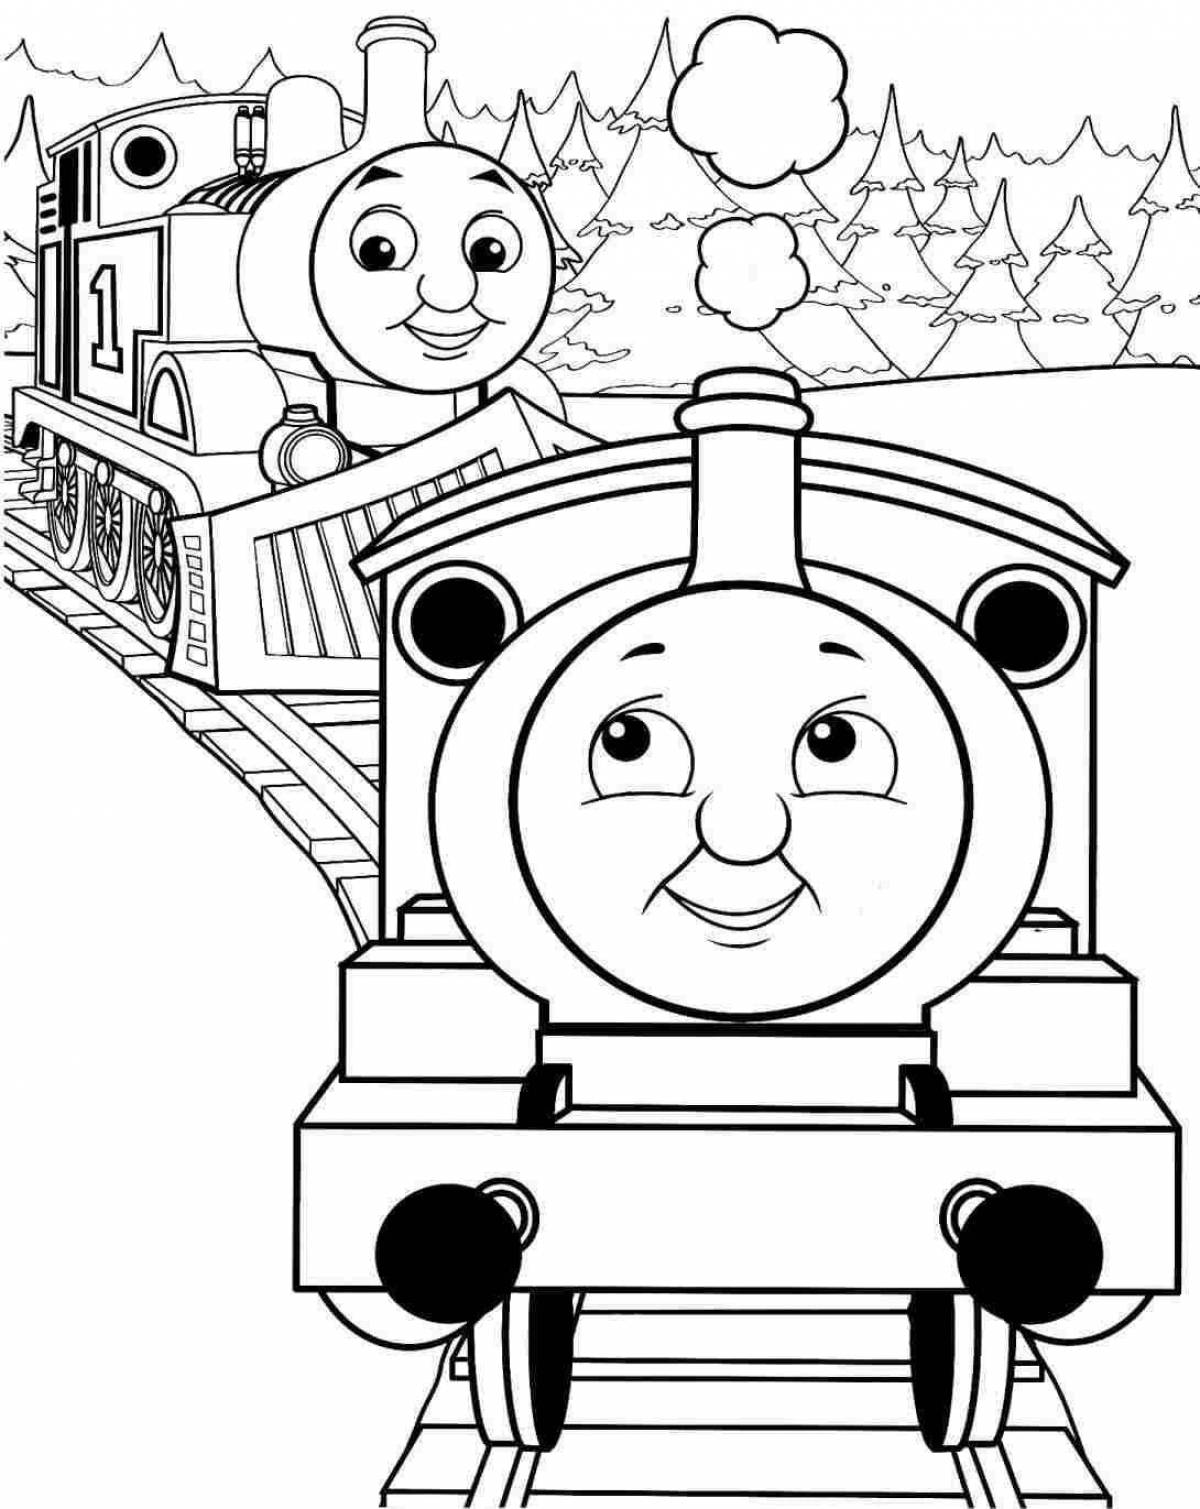 The best train coloring book for kids 2-3 years old